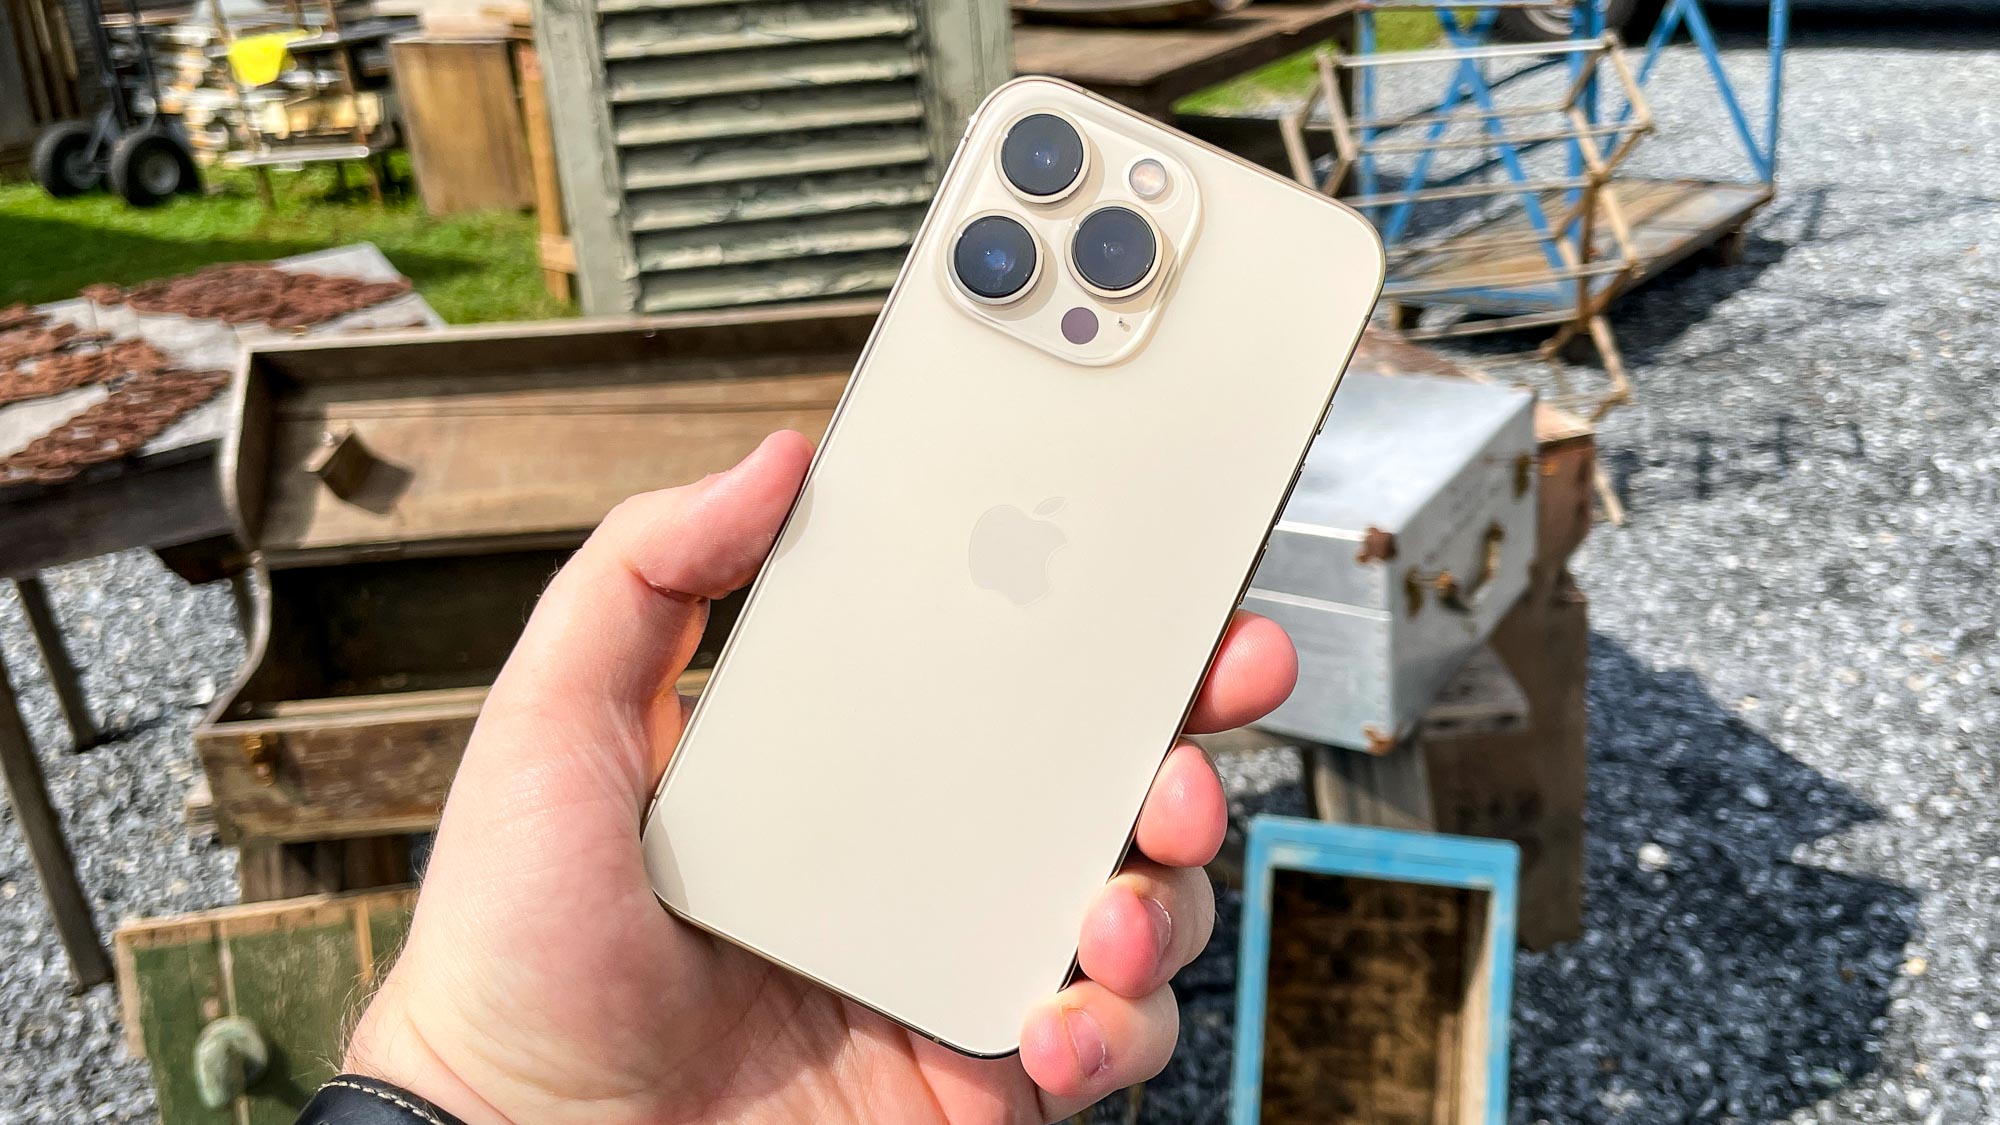 iphone 13 pro left in sunlight with various junk in the background